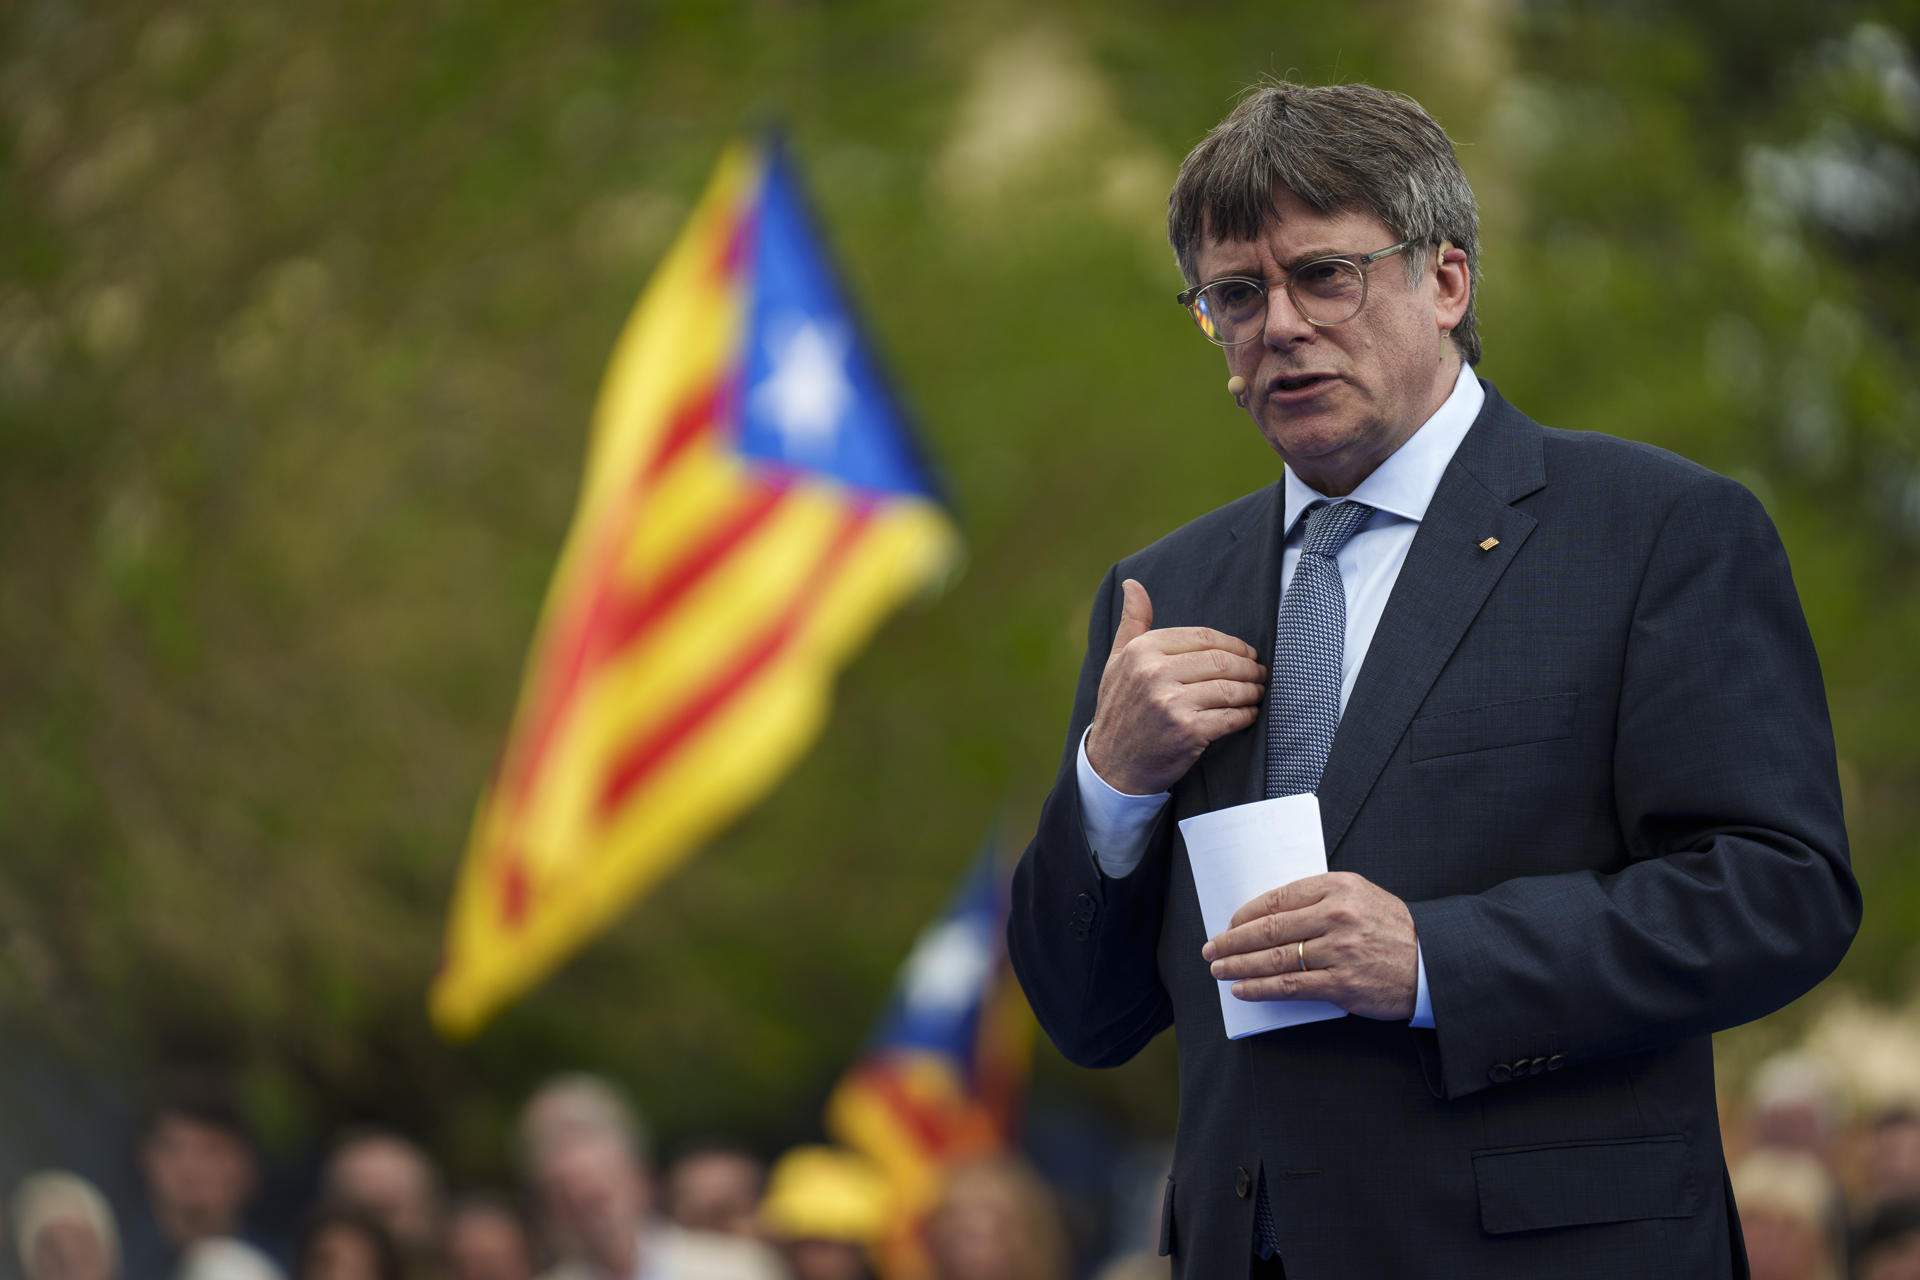 Supreme Court wants Puigdemont to testify voluntarily over terrorism accusations in June